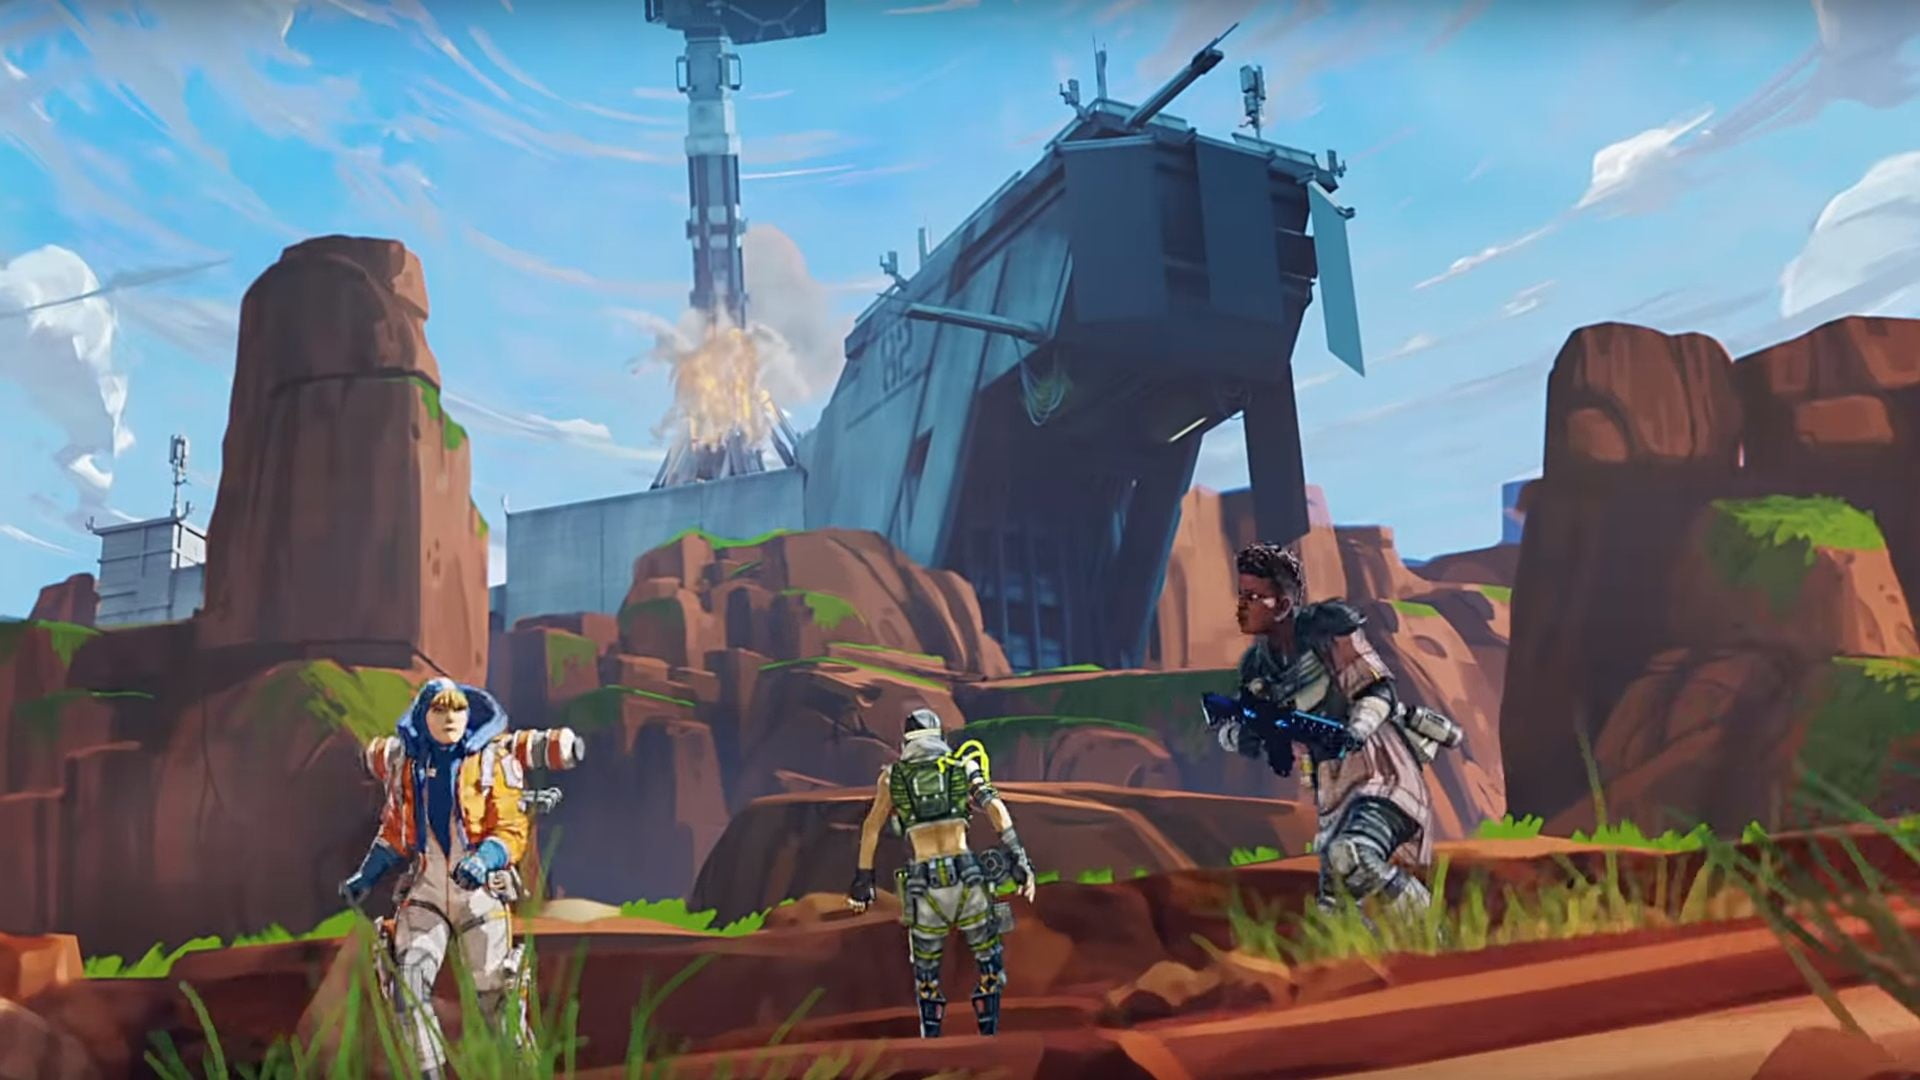 Leaked Apex Legends Trailers Tease New Character, Map Changes